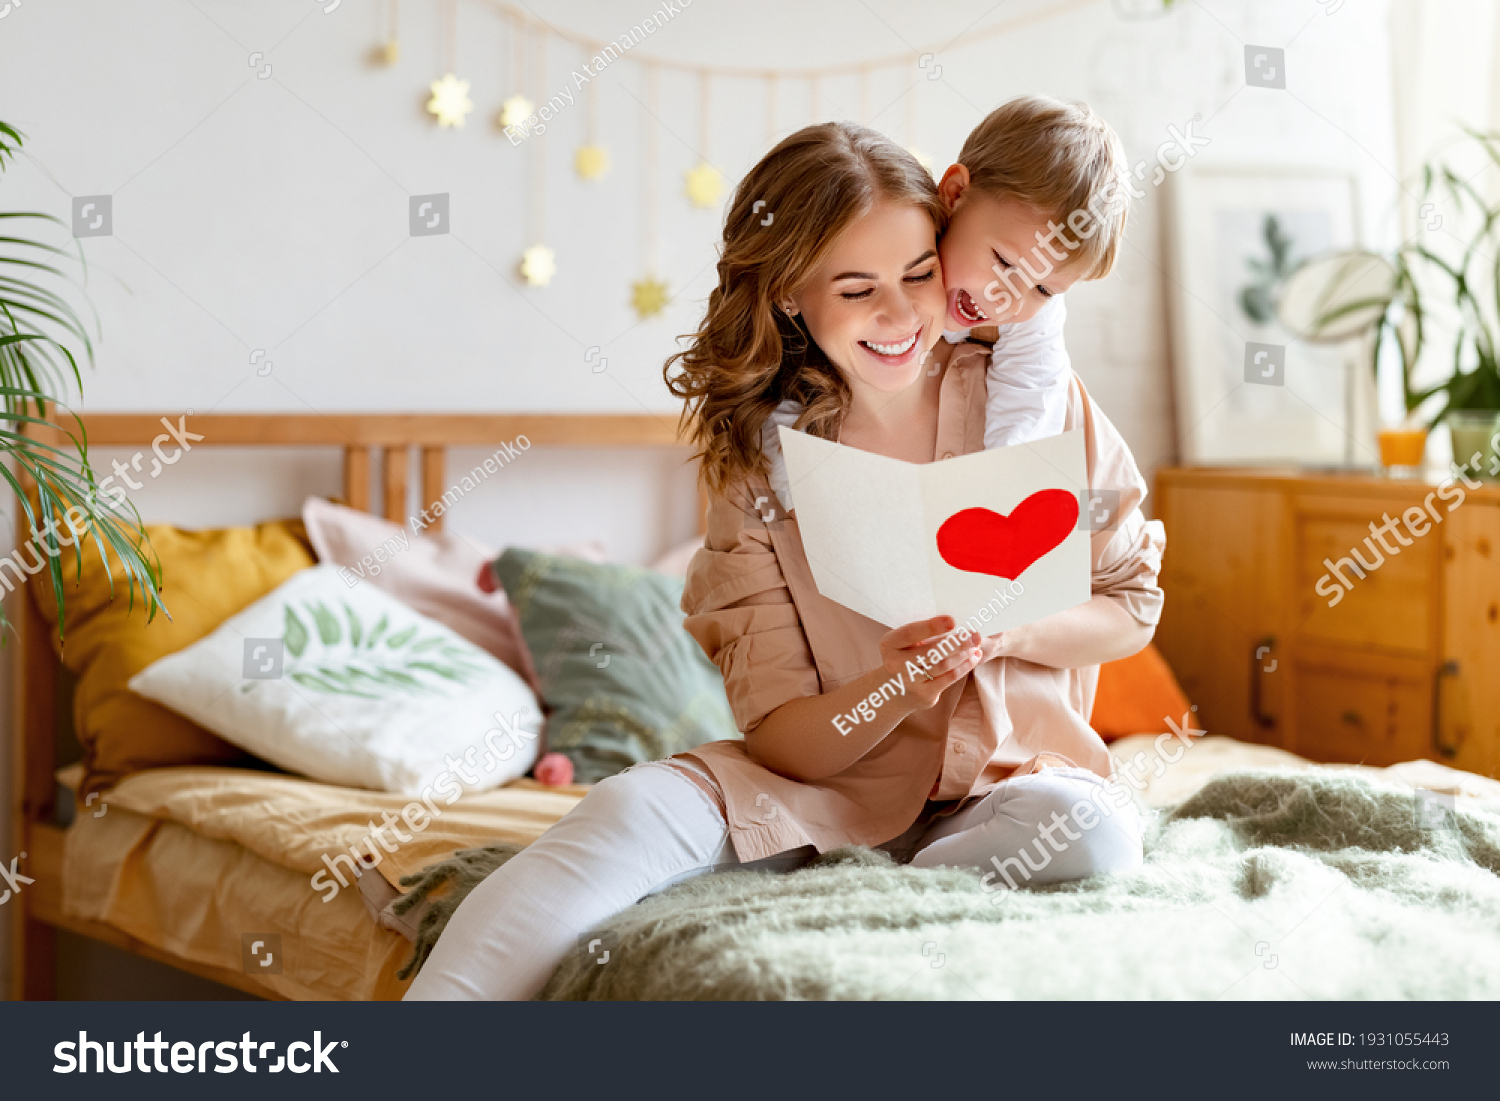 Cheerful mother hugging son and reading handmade greeting card with heart while resting on bed during holiday celebration mothers day  at home #1931055443